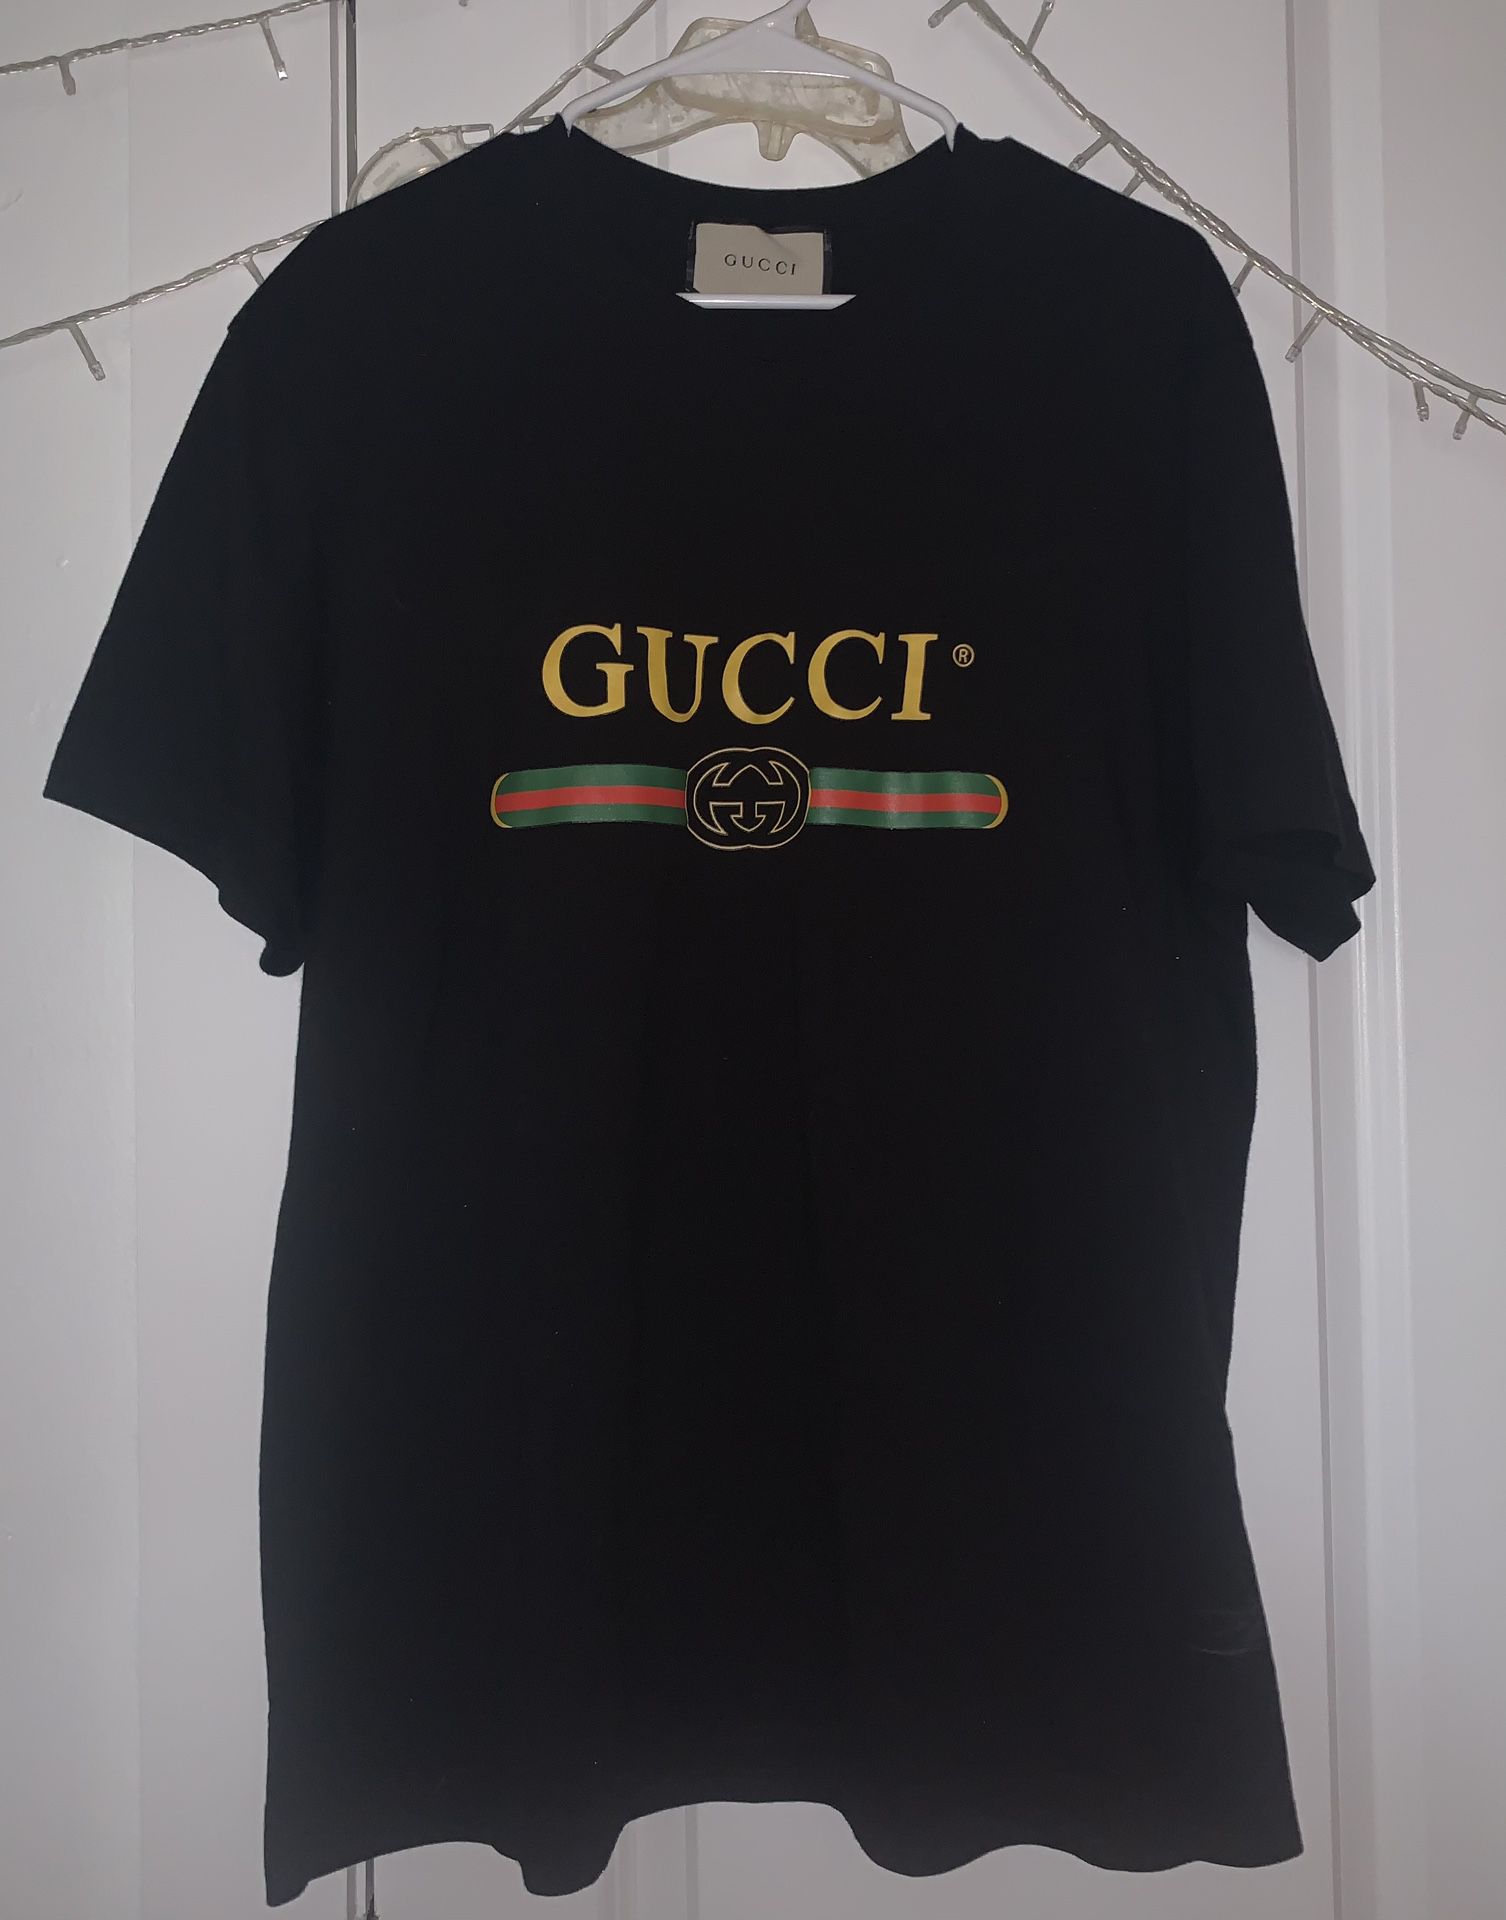 Gucci T-Shirt XL for Sale in Staten Island, NY - OfferUp